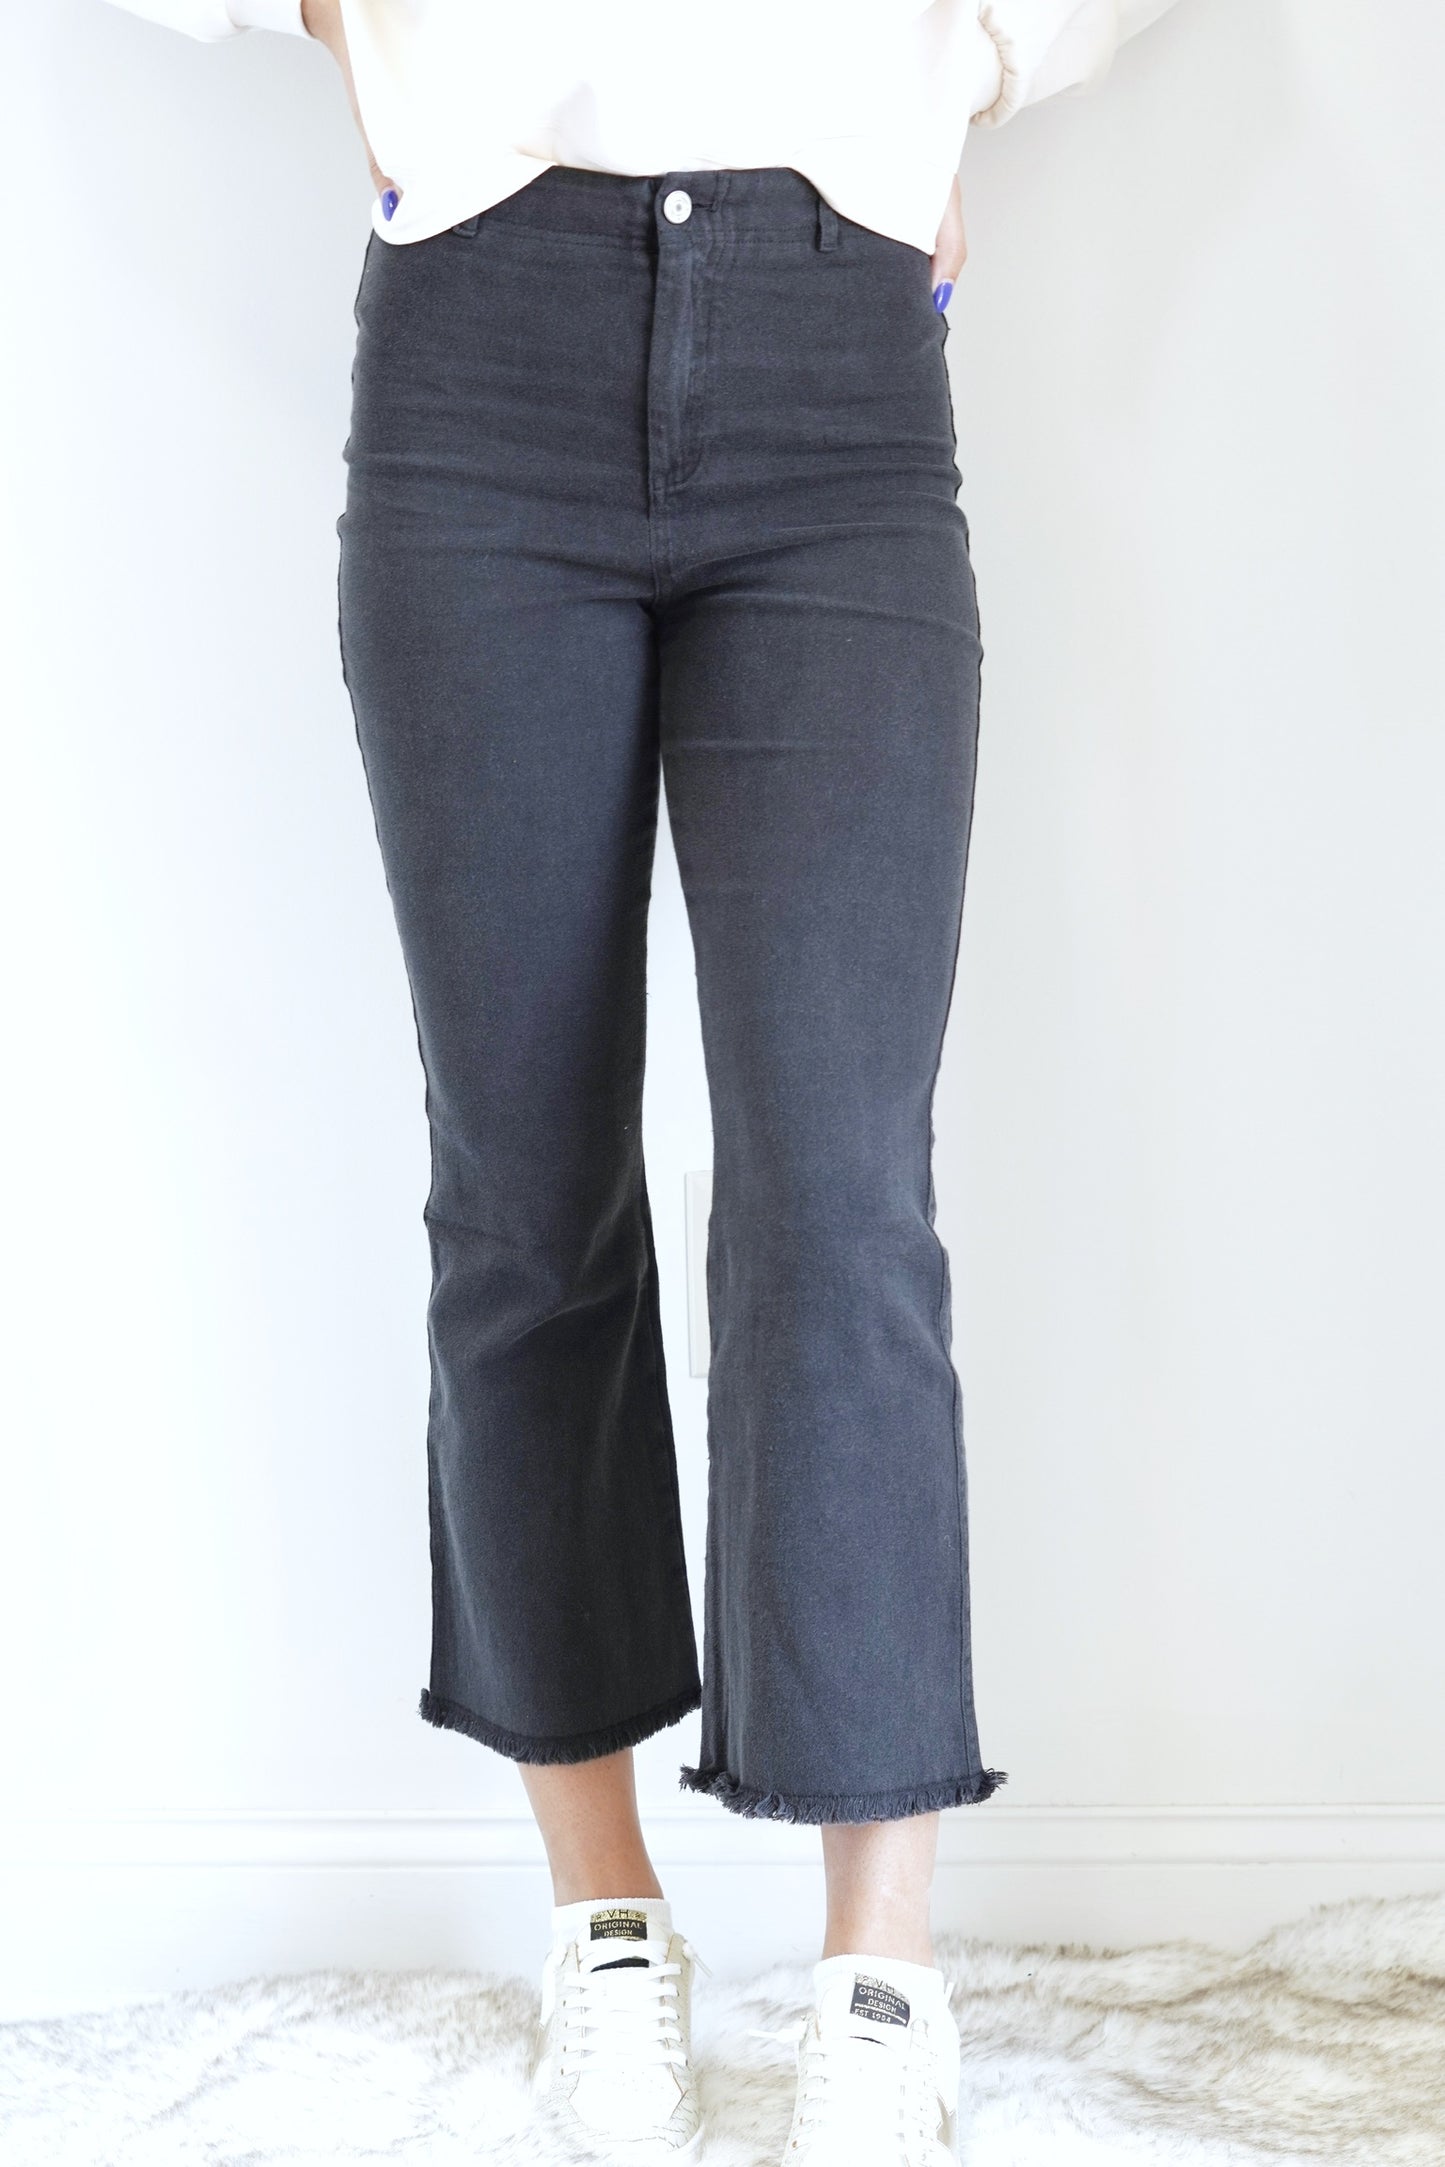 Judy Raw Hem High Waisted Pants Button Closure Wide Leg that hits above the ankle High Rise Black Color Cute edge detail Comfortable, stretchy fit 97% Cotton,3%Spandex Dry Clean Only